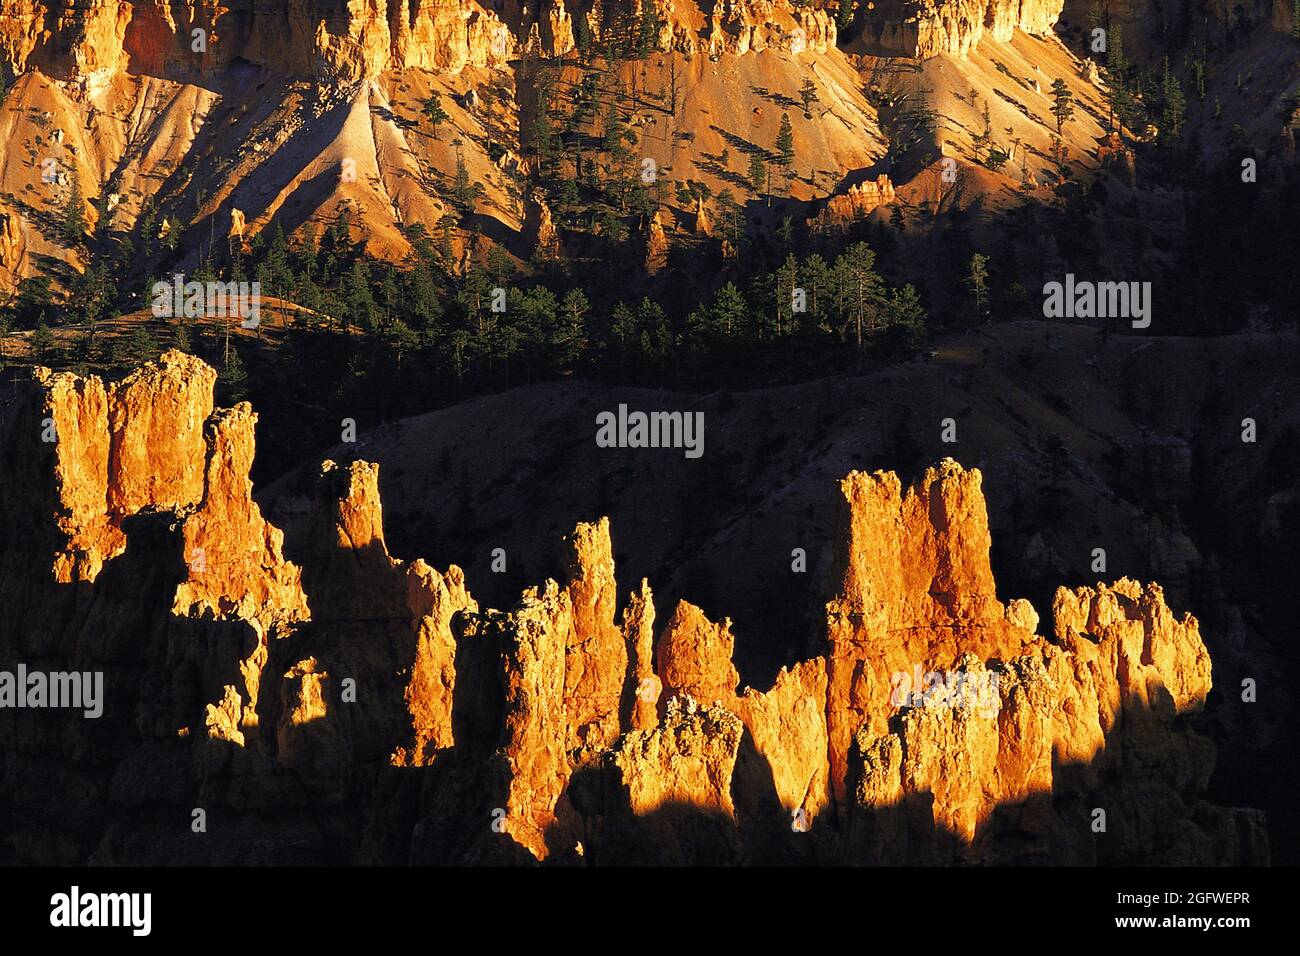 Highly-eroded pinnacles and cliffs in Bryce Canyon, Utah, dramatically lit in low evening light, USA, Utah, Bryce Canyon National Park Stock Photo